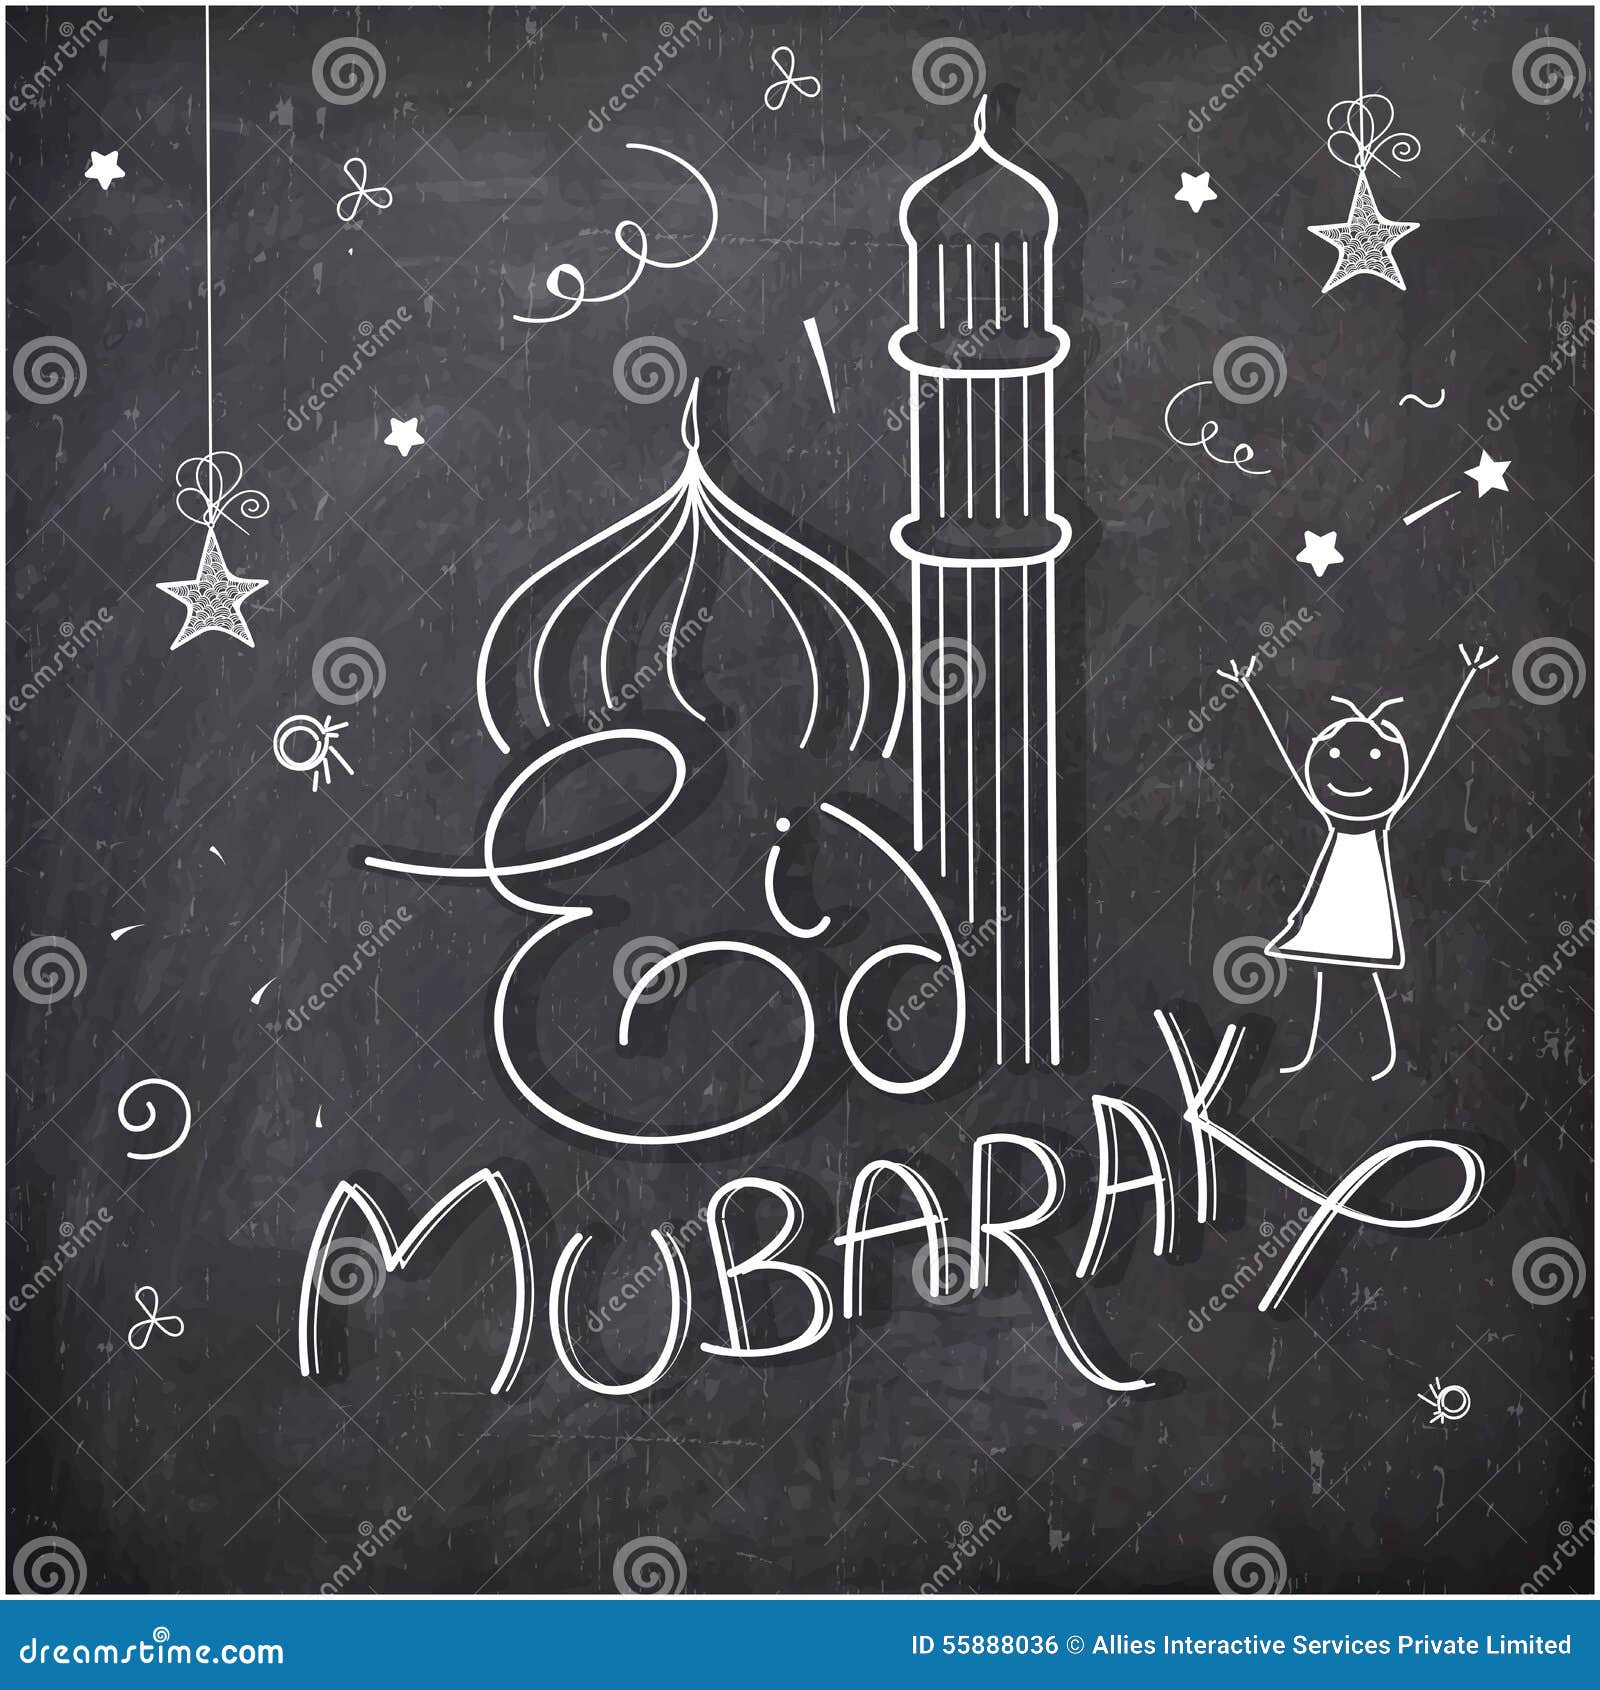 Line art illustration of a mosque on abstract background for muslim  community festival EId Mubarak  Stock Image  Everypixel